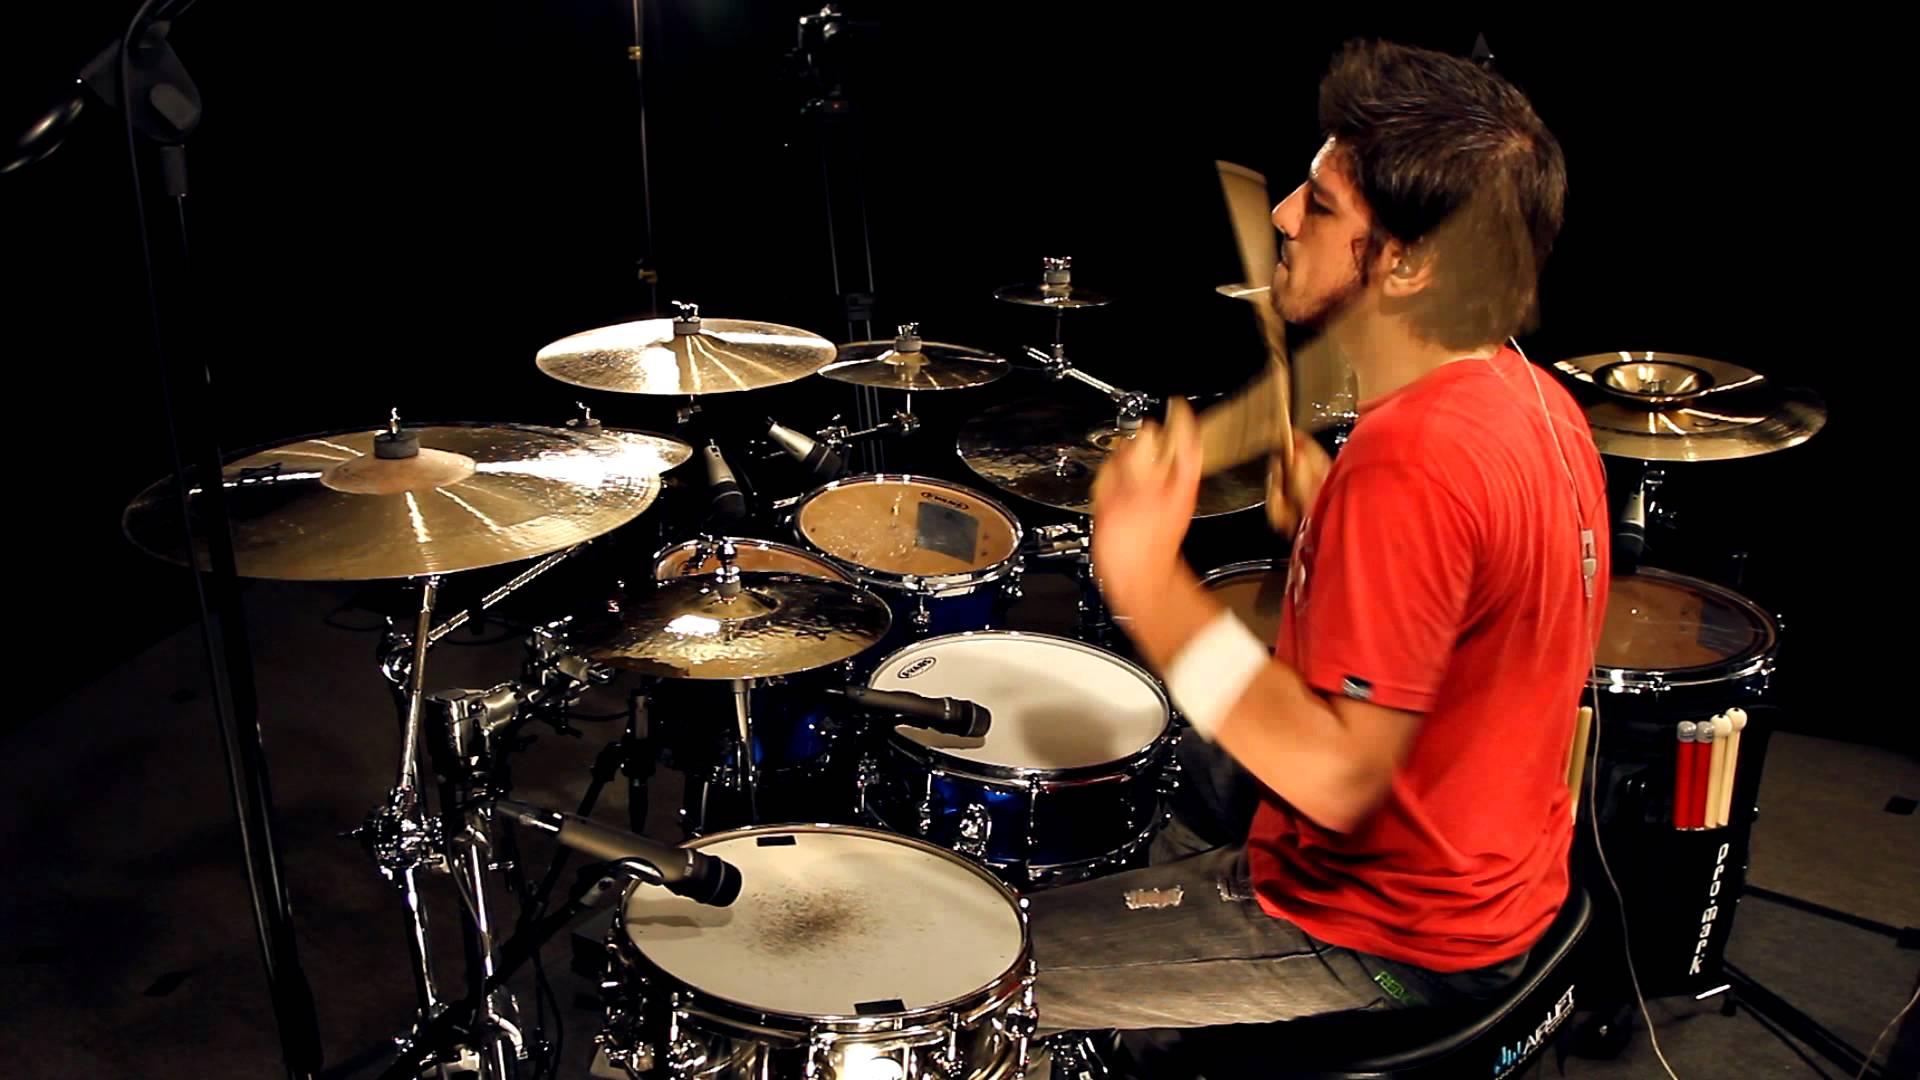 Cobus - Tonight Alive - Little Lion Man (Drum Cover) - YouTube